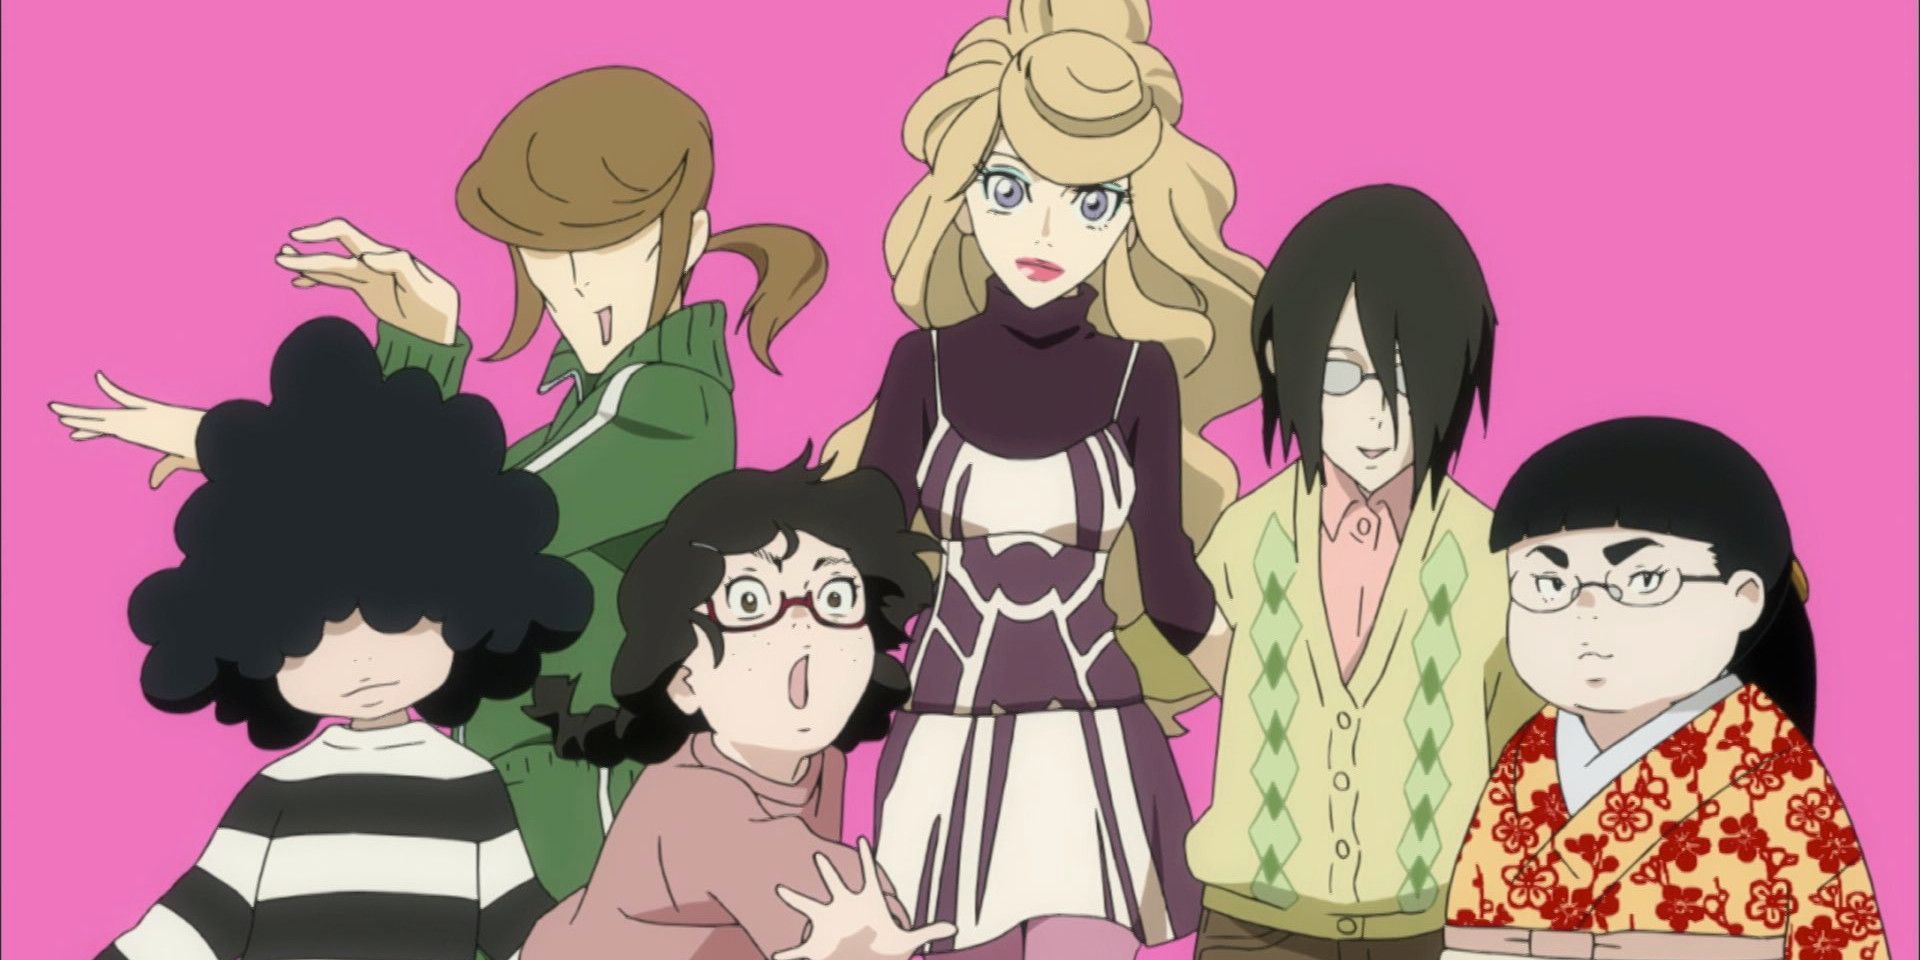 The main cast members from the Princess Jellyfish anime.